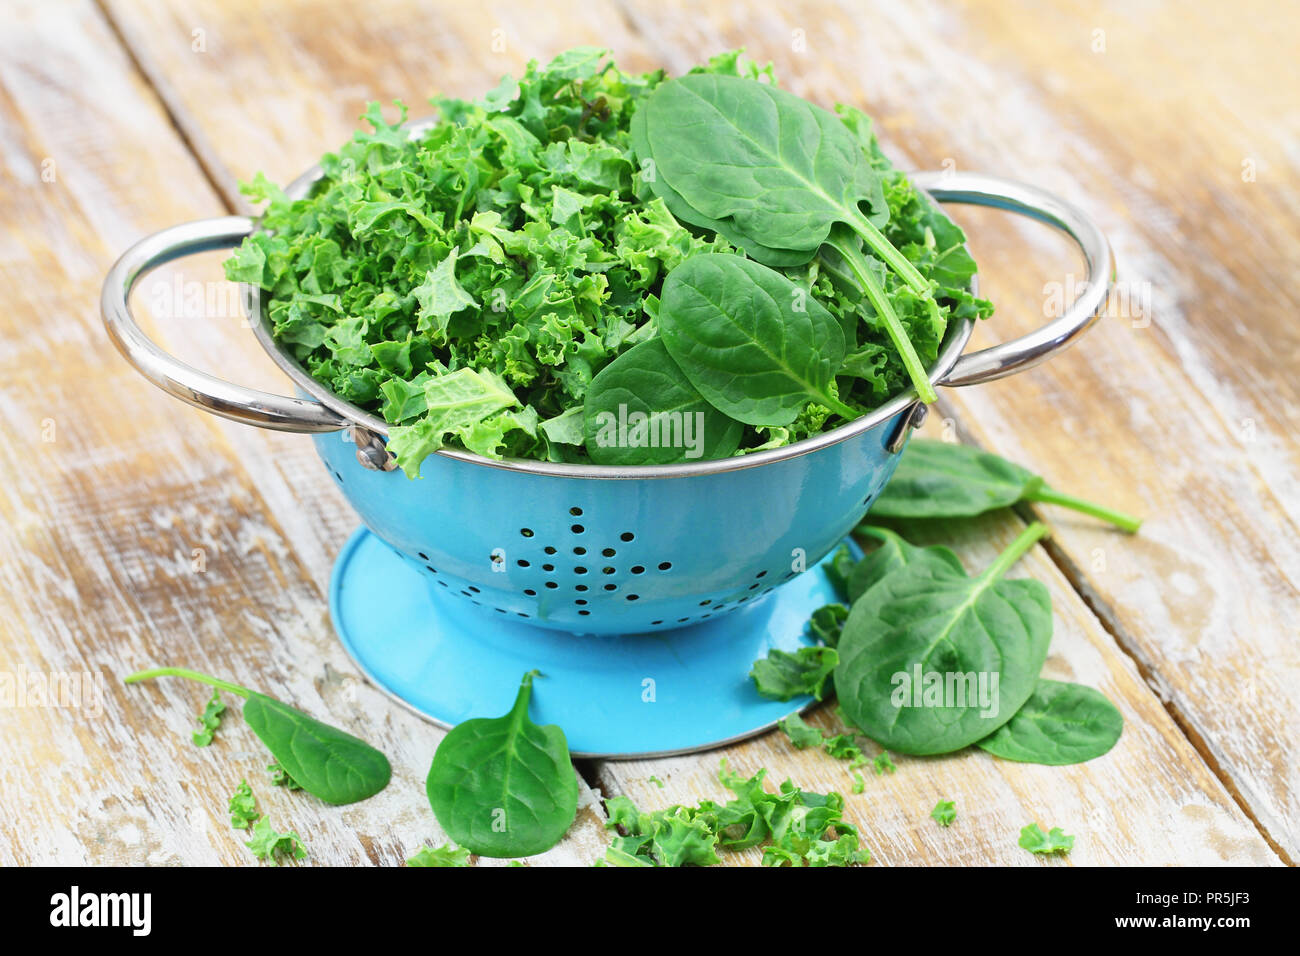 Shredded raw kale and spinach baby leaves in blue colander on rustic wooden surface with copy space Stock Photo